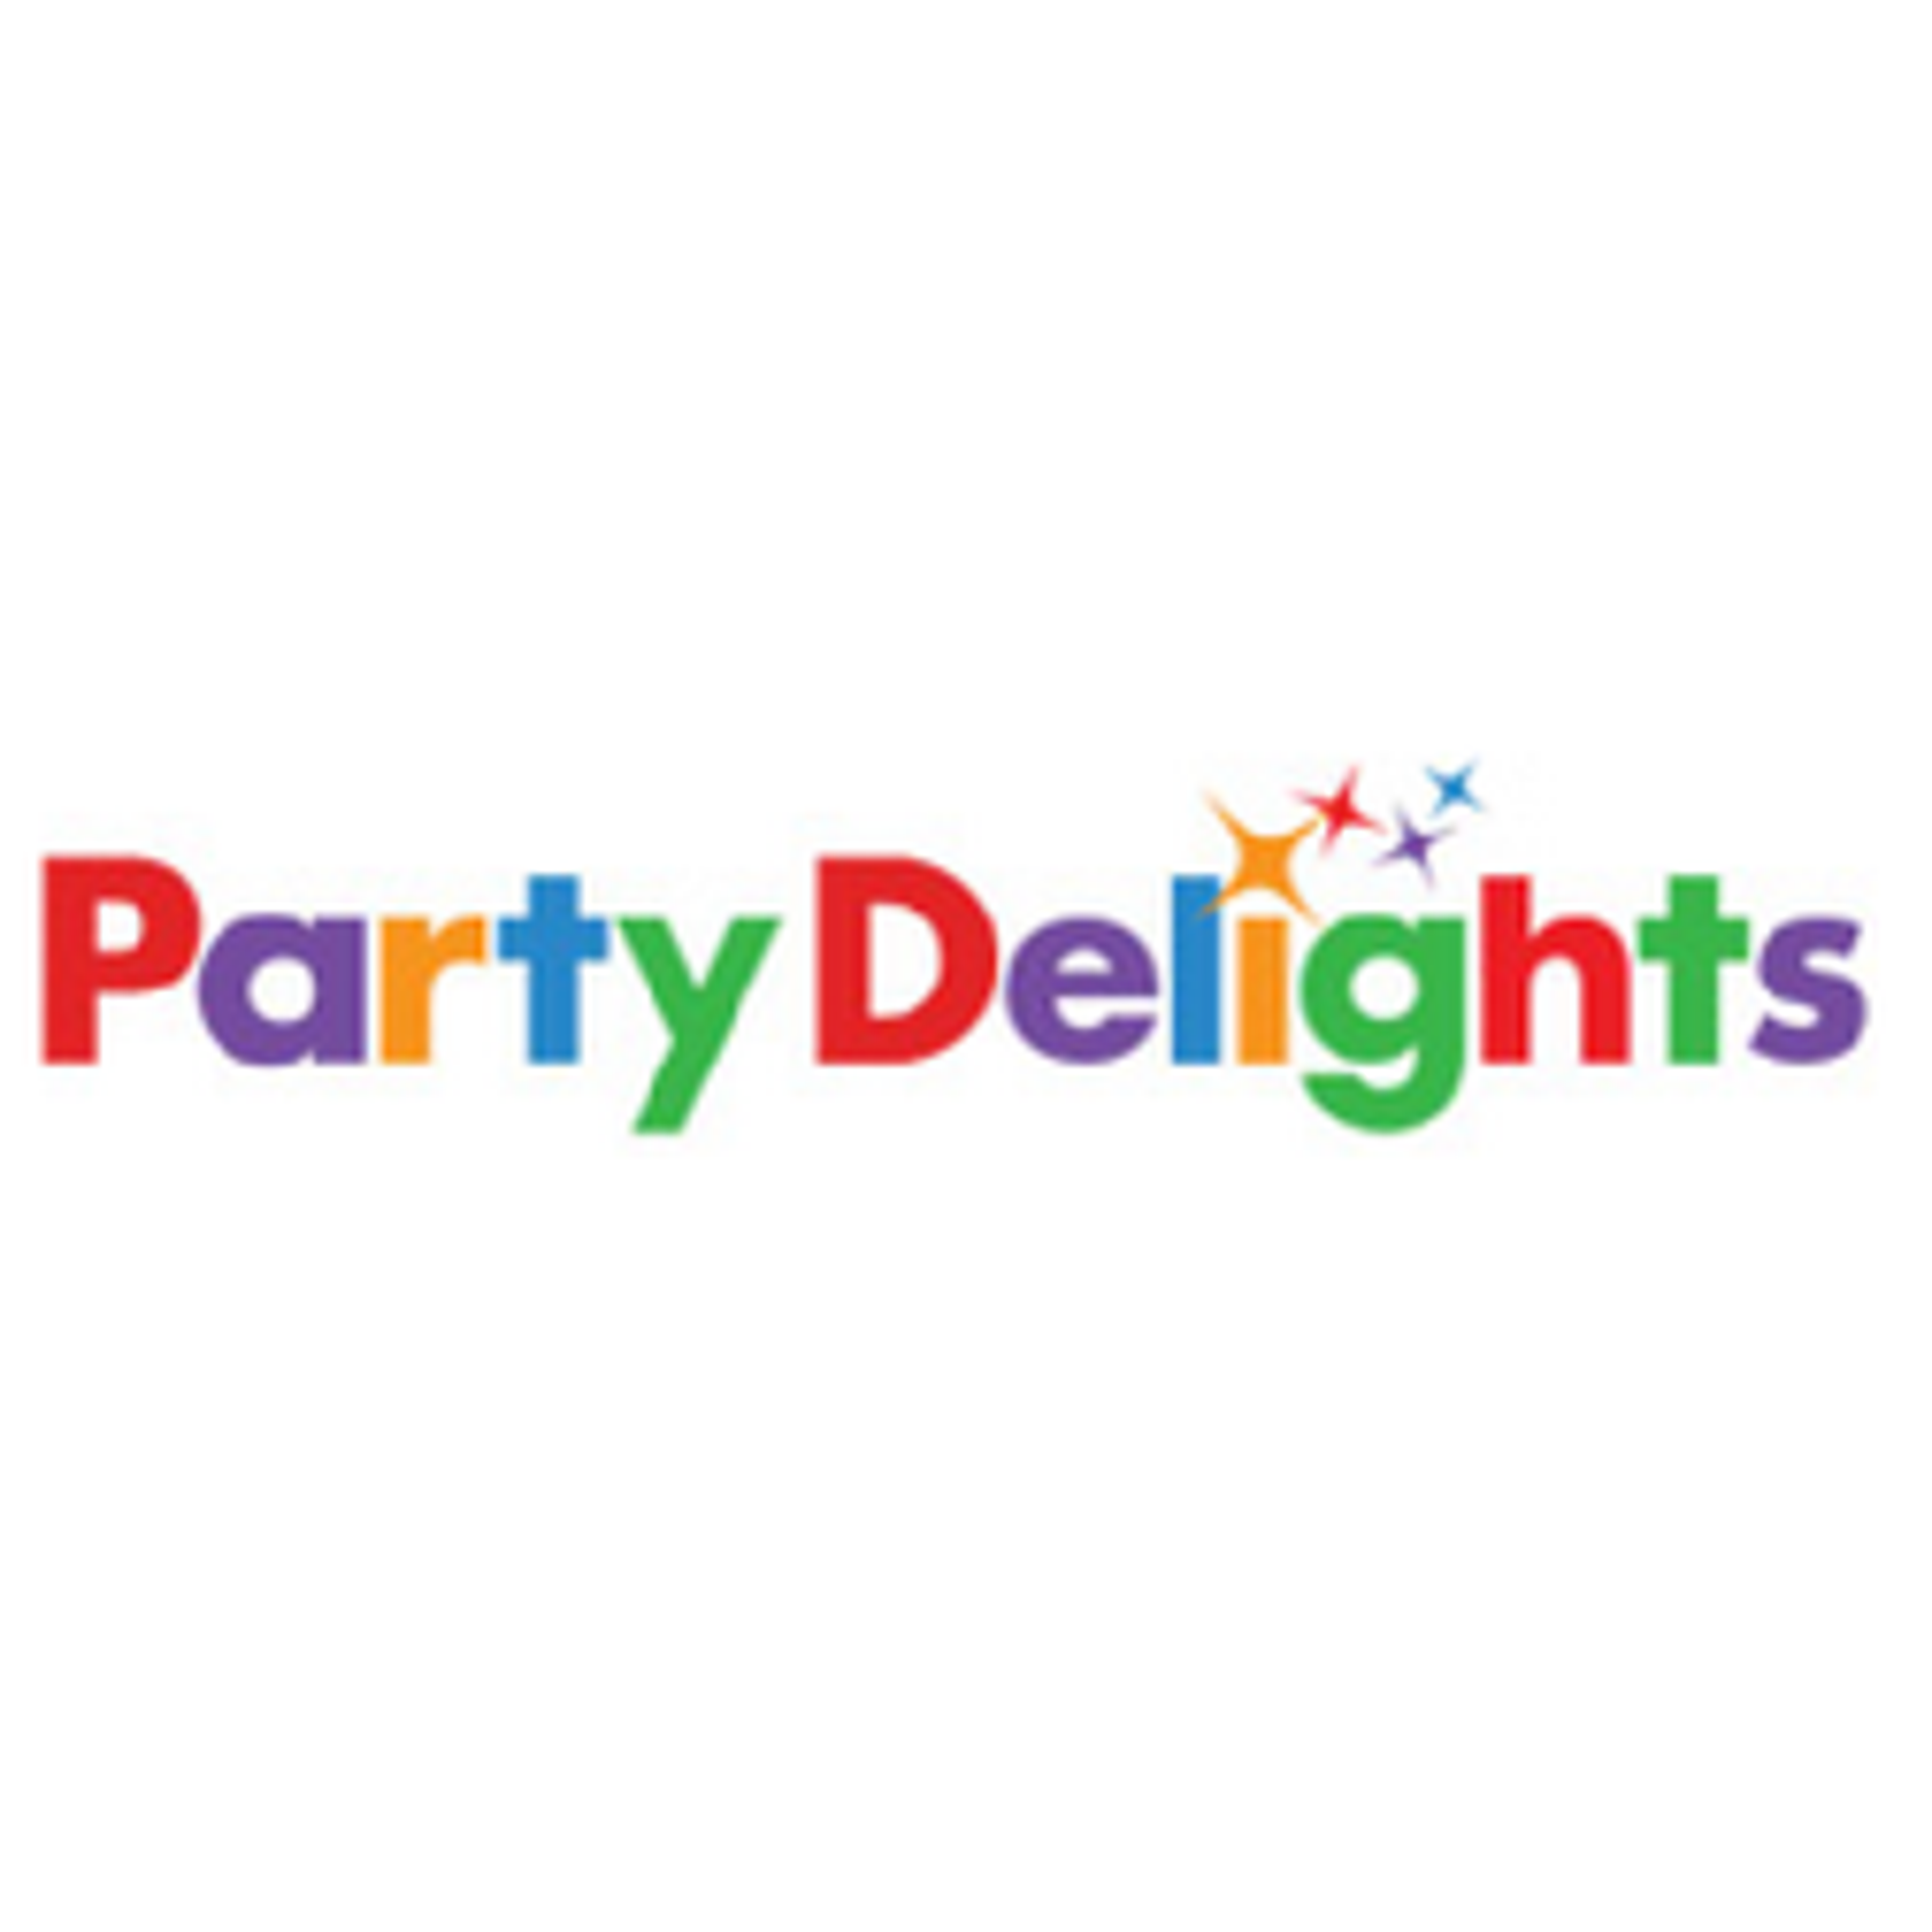  Party Delights 